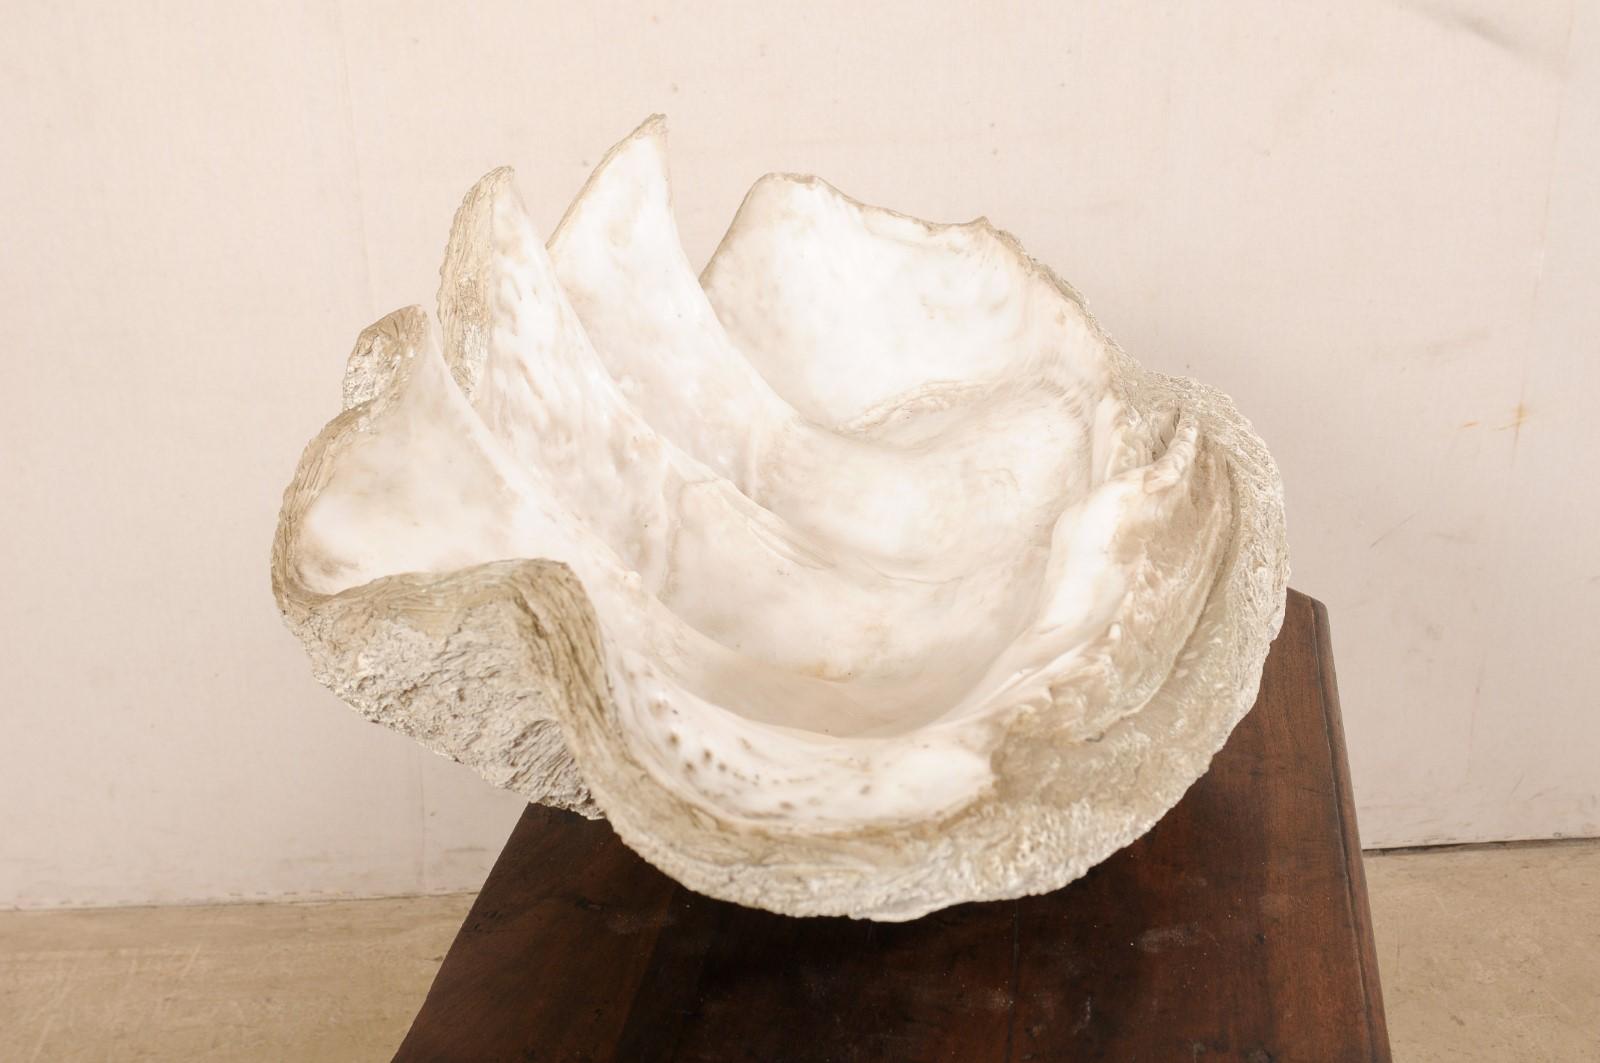 Composition Giant Clam Shell 'Faux' Fabulously Artisan Crafted-Looks like the Real Thing For Sale